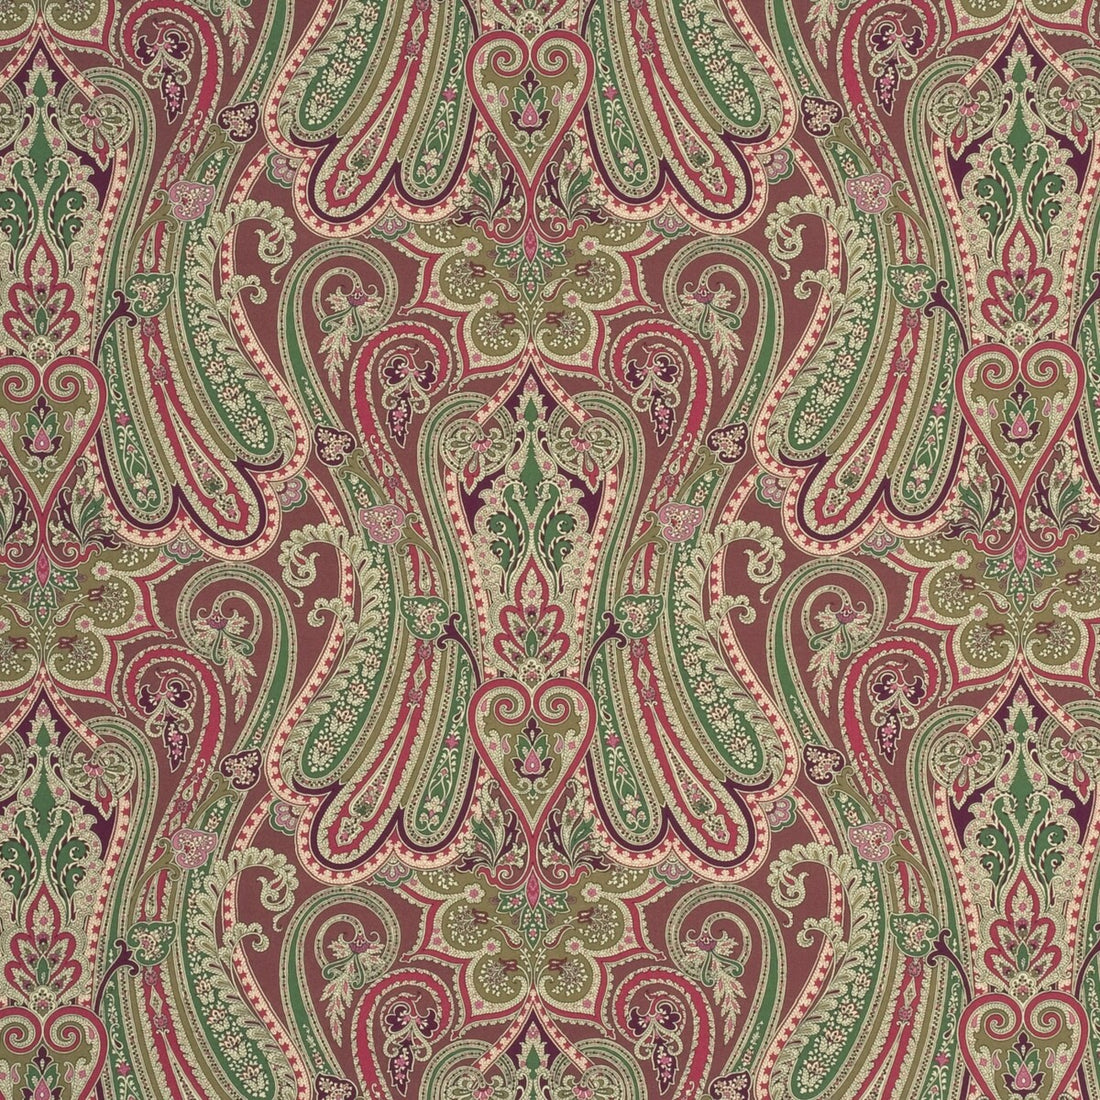 Heirloom Paisley fabric in damson color - pattern FD260.H35.0 - by Mulberry in the Country Weekend collection